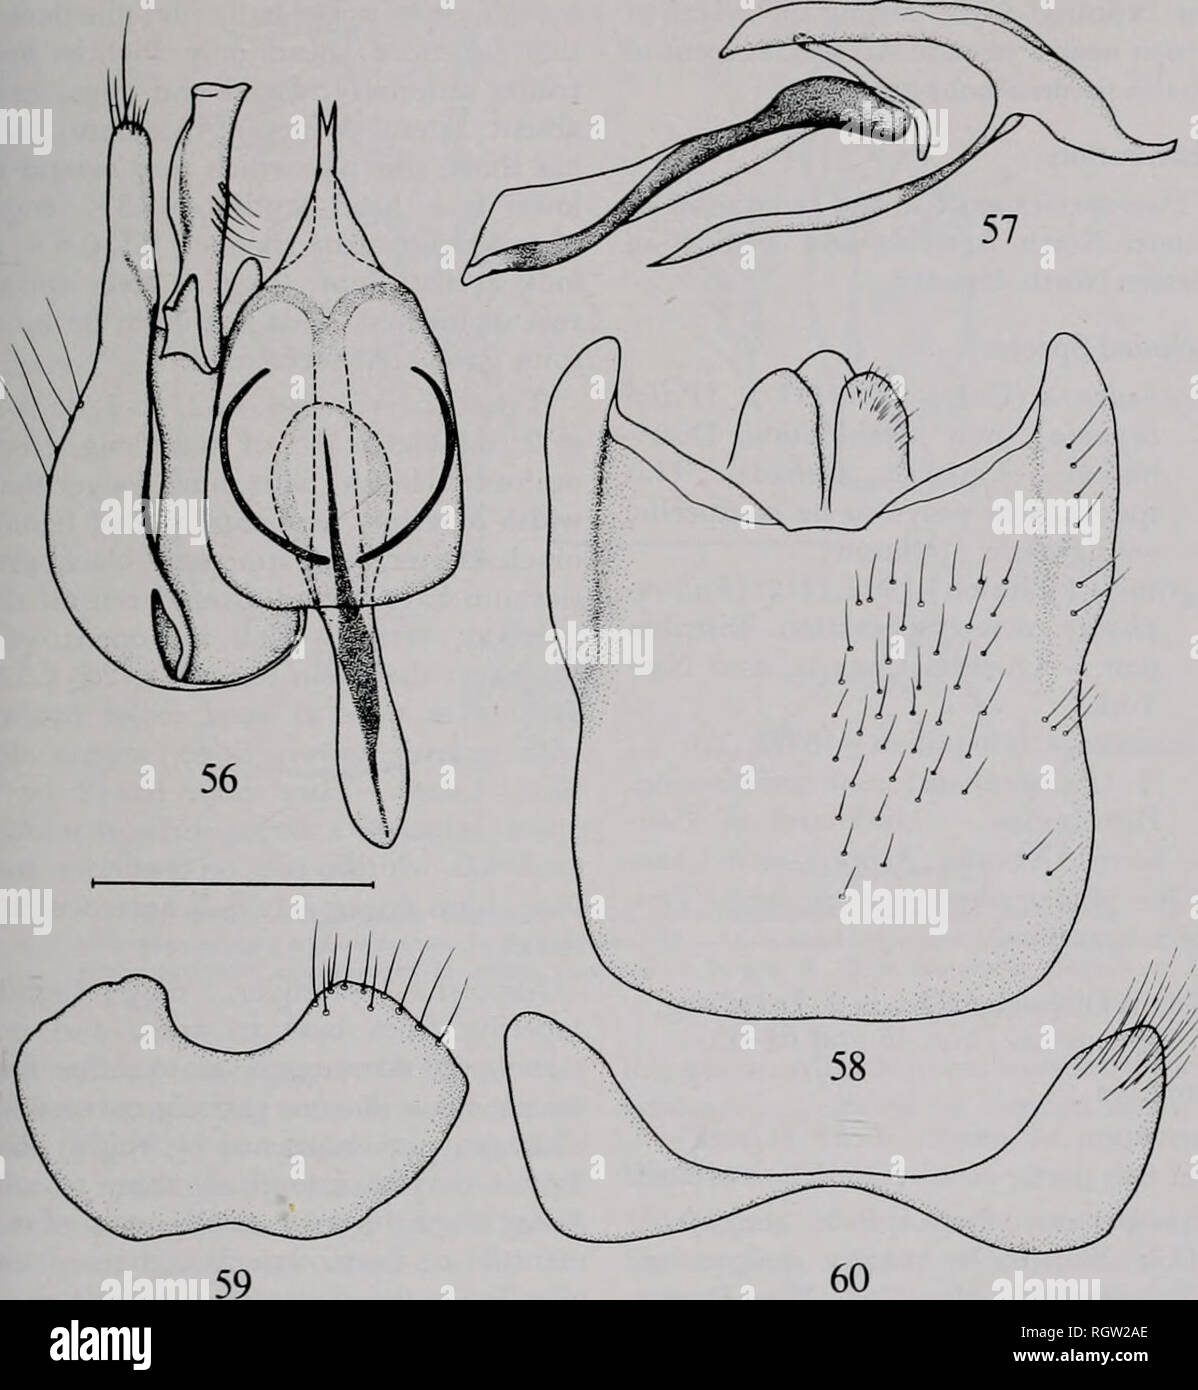 . Bulletin. Natural history; Natural history. Nov., 1980 Irwin &amp; Lyneborg: The Genera of Nearctic Therevidae 209. Fig. 56—60. — Viriliricta montivaga (Coq.) male ierminalia. 56. — Right gonocoxite with appendages and oedeagus in dorsal view. 57. — Aedeagus in lateral view. 58. — Epandrium with appendages in dorsal view. 59. — Sternite 8. 60.—Tergite 8. Scale: 0.5 mm. margin of aedeagus; ventral epandrial sclerite rather well sclerotized, especially fKisteriorly, where it is pointed and keel shaped, and diverges from cerci; para- meral apodeme without attachment to aedeagus; distiphallus in Stock Photo